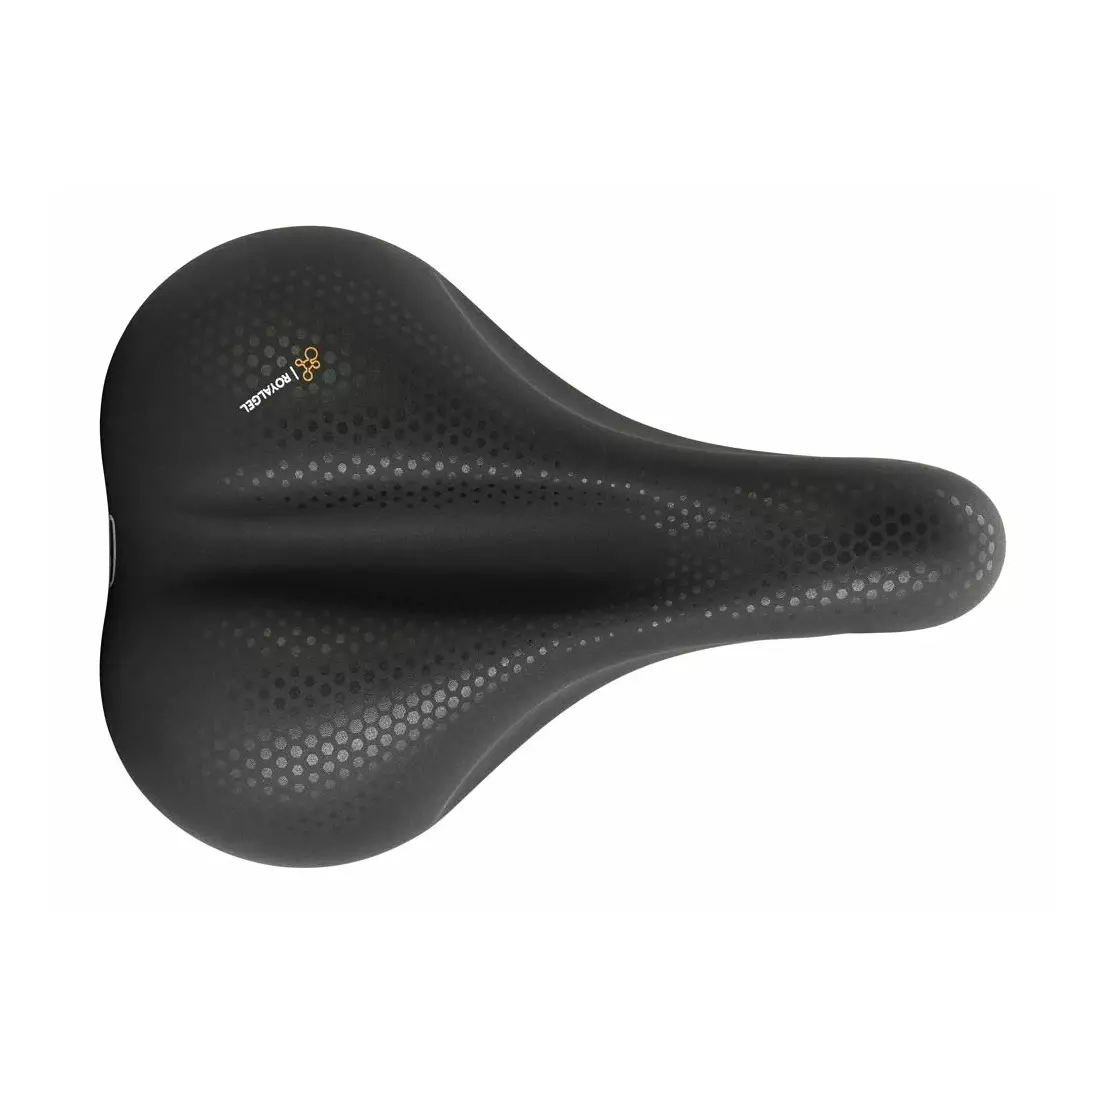 SELLEROYAL CLASSIC MODERATE AVENUE 60st Women's bicycle seat, black